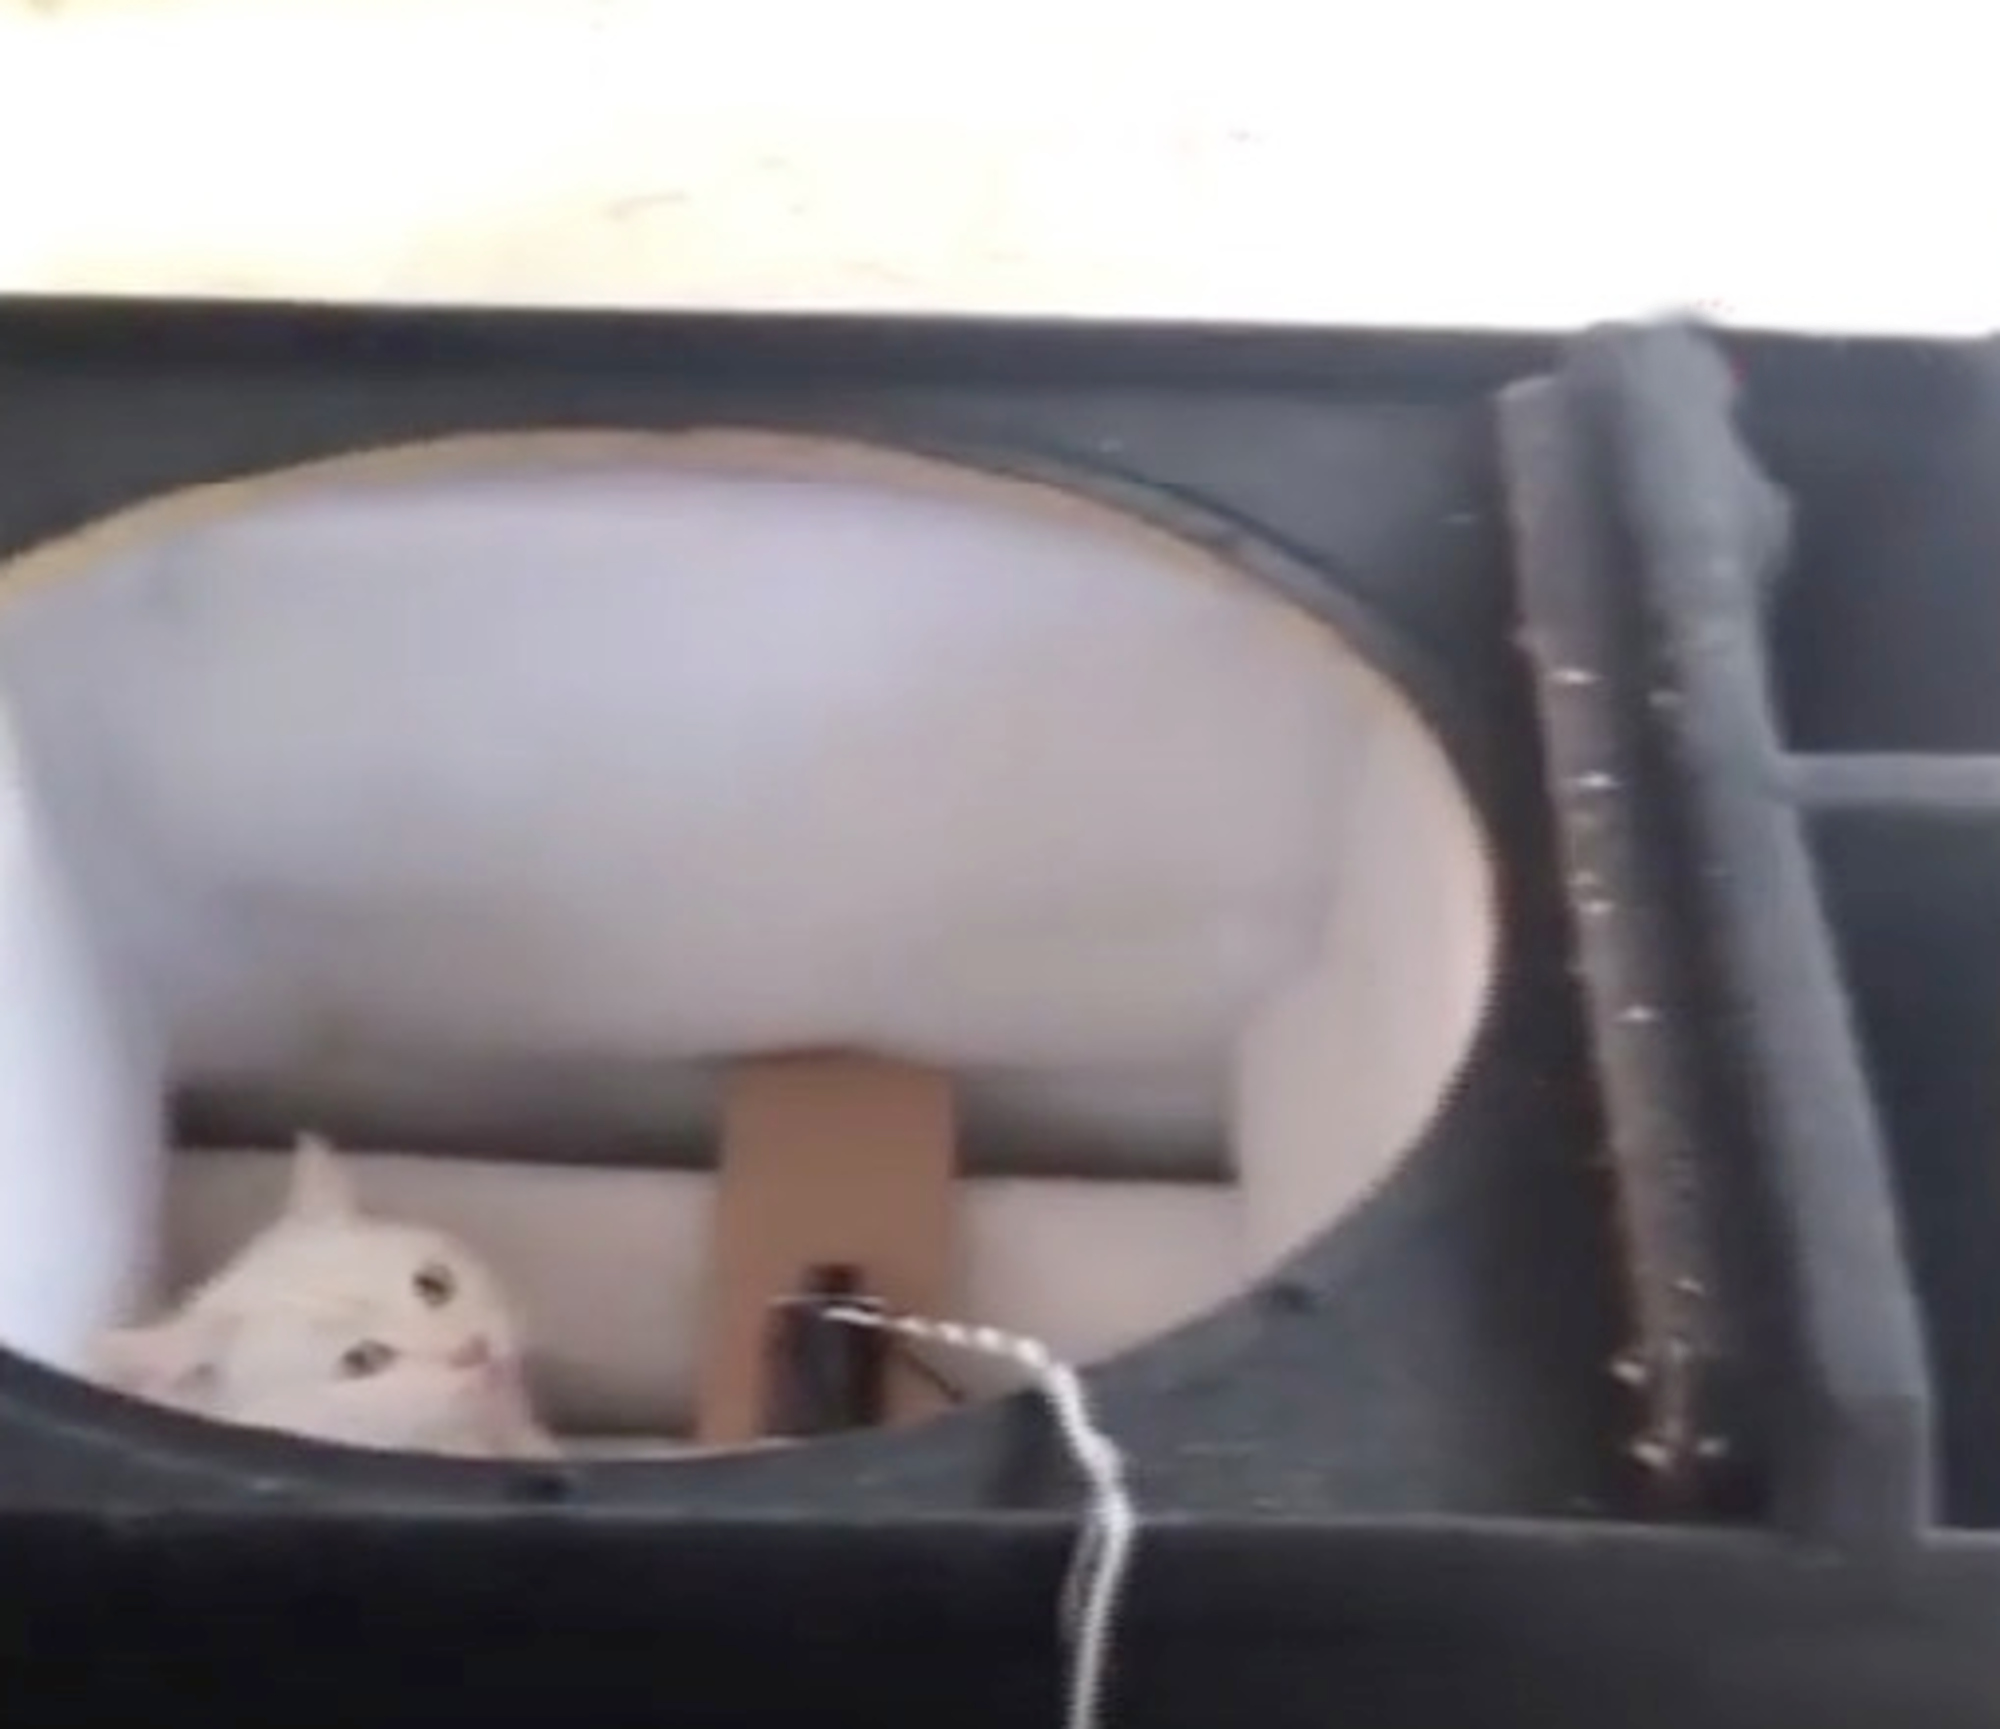 Read more about the article Drama Students Rescue Cat Stuck Inside Speaker Cabinet